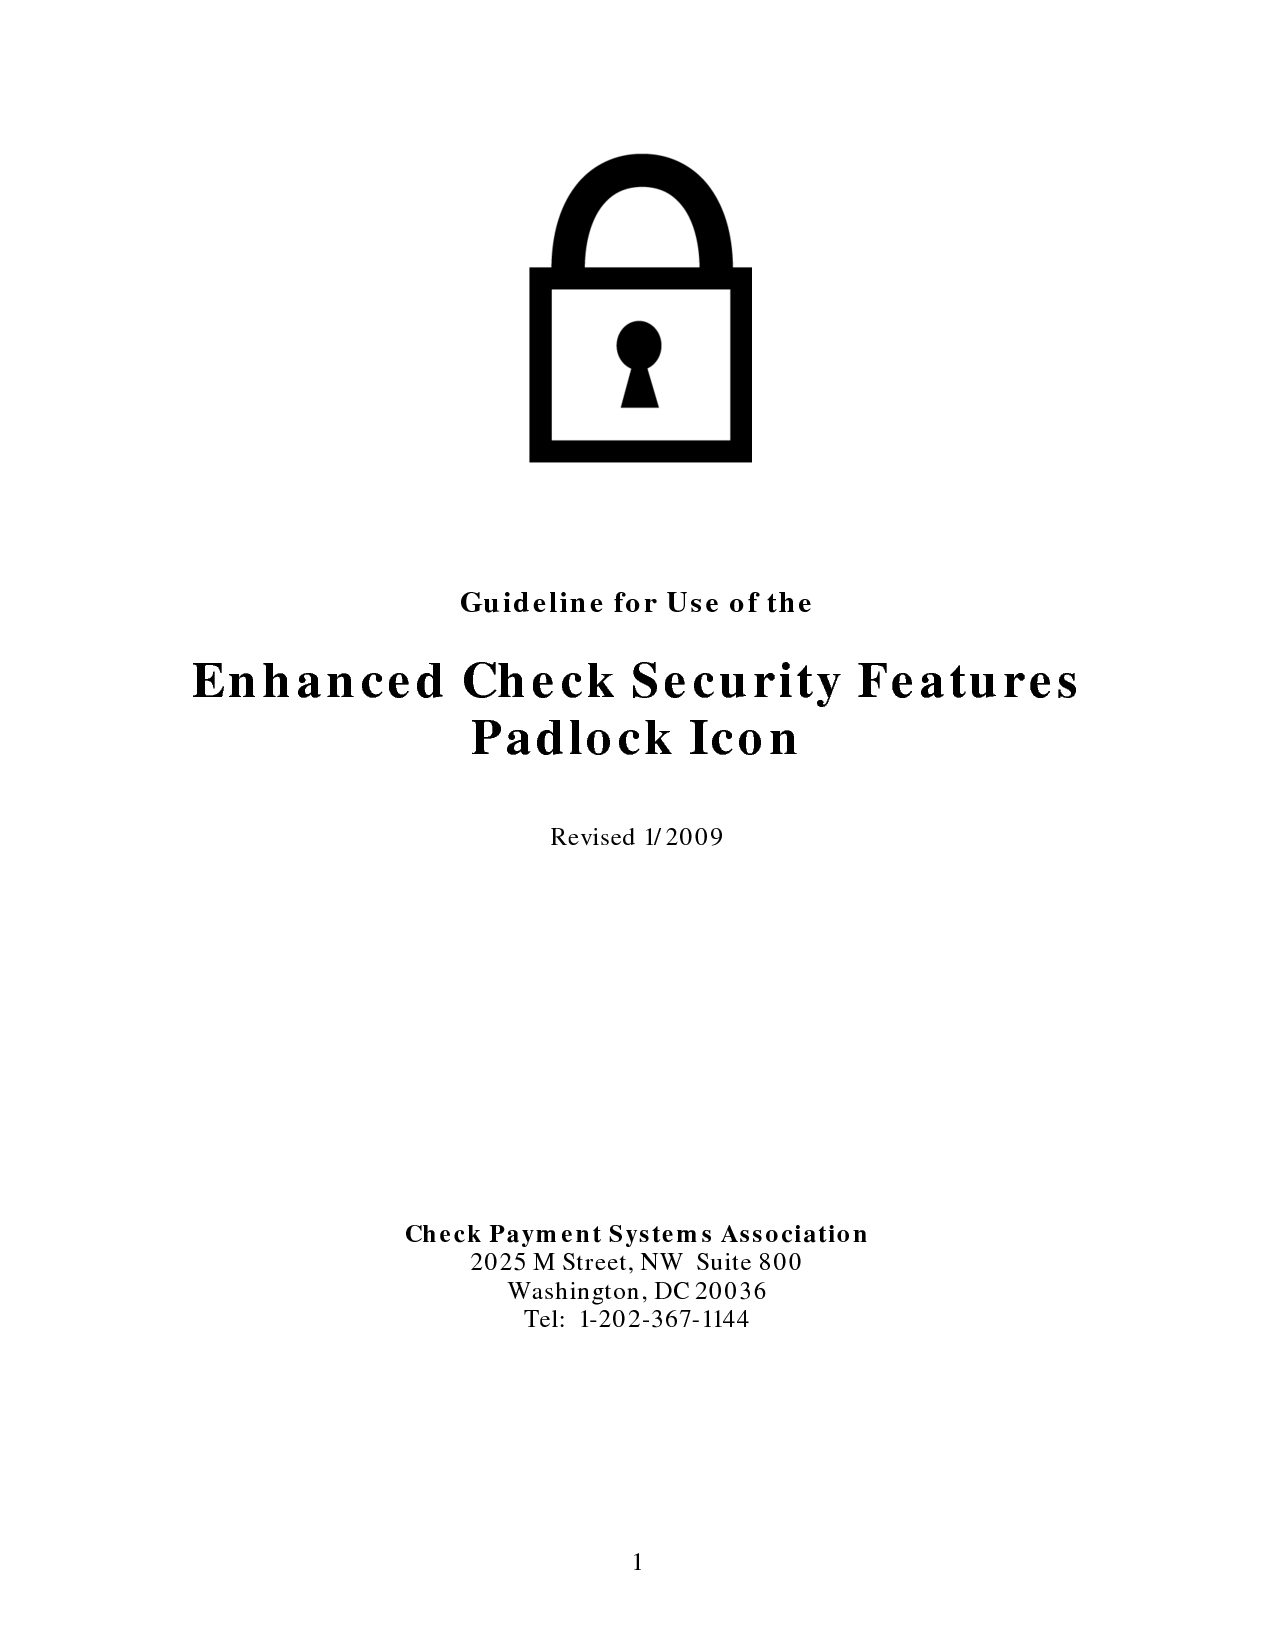 Check Security Features Padlock